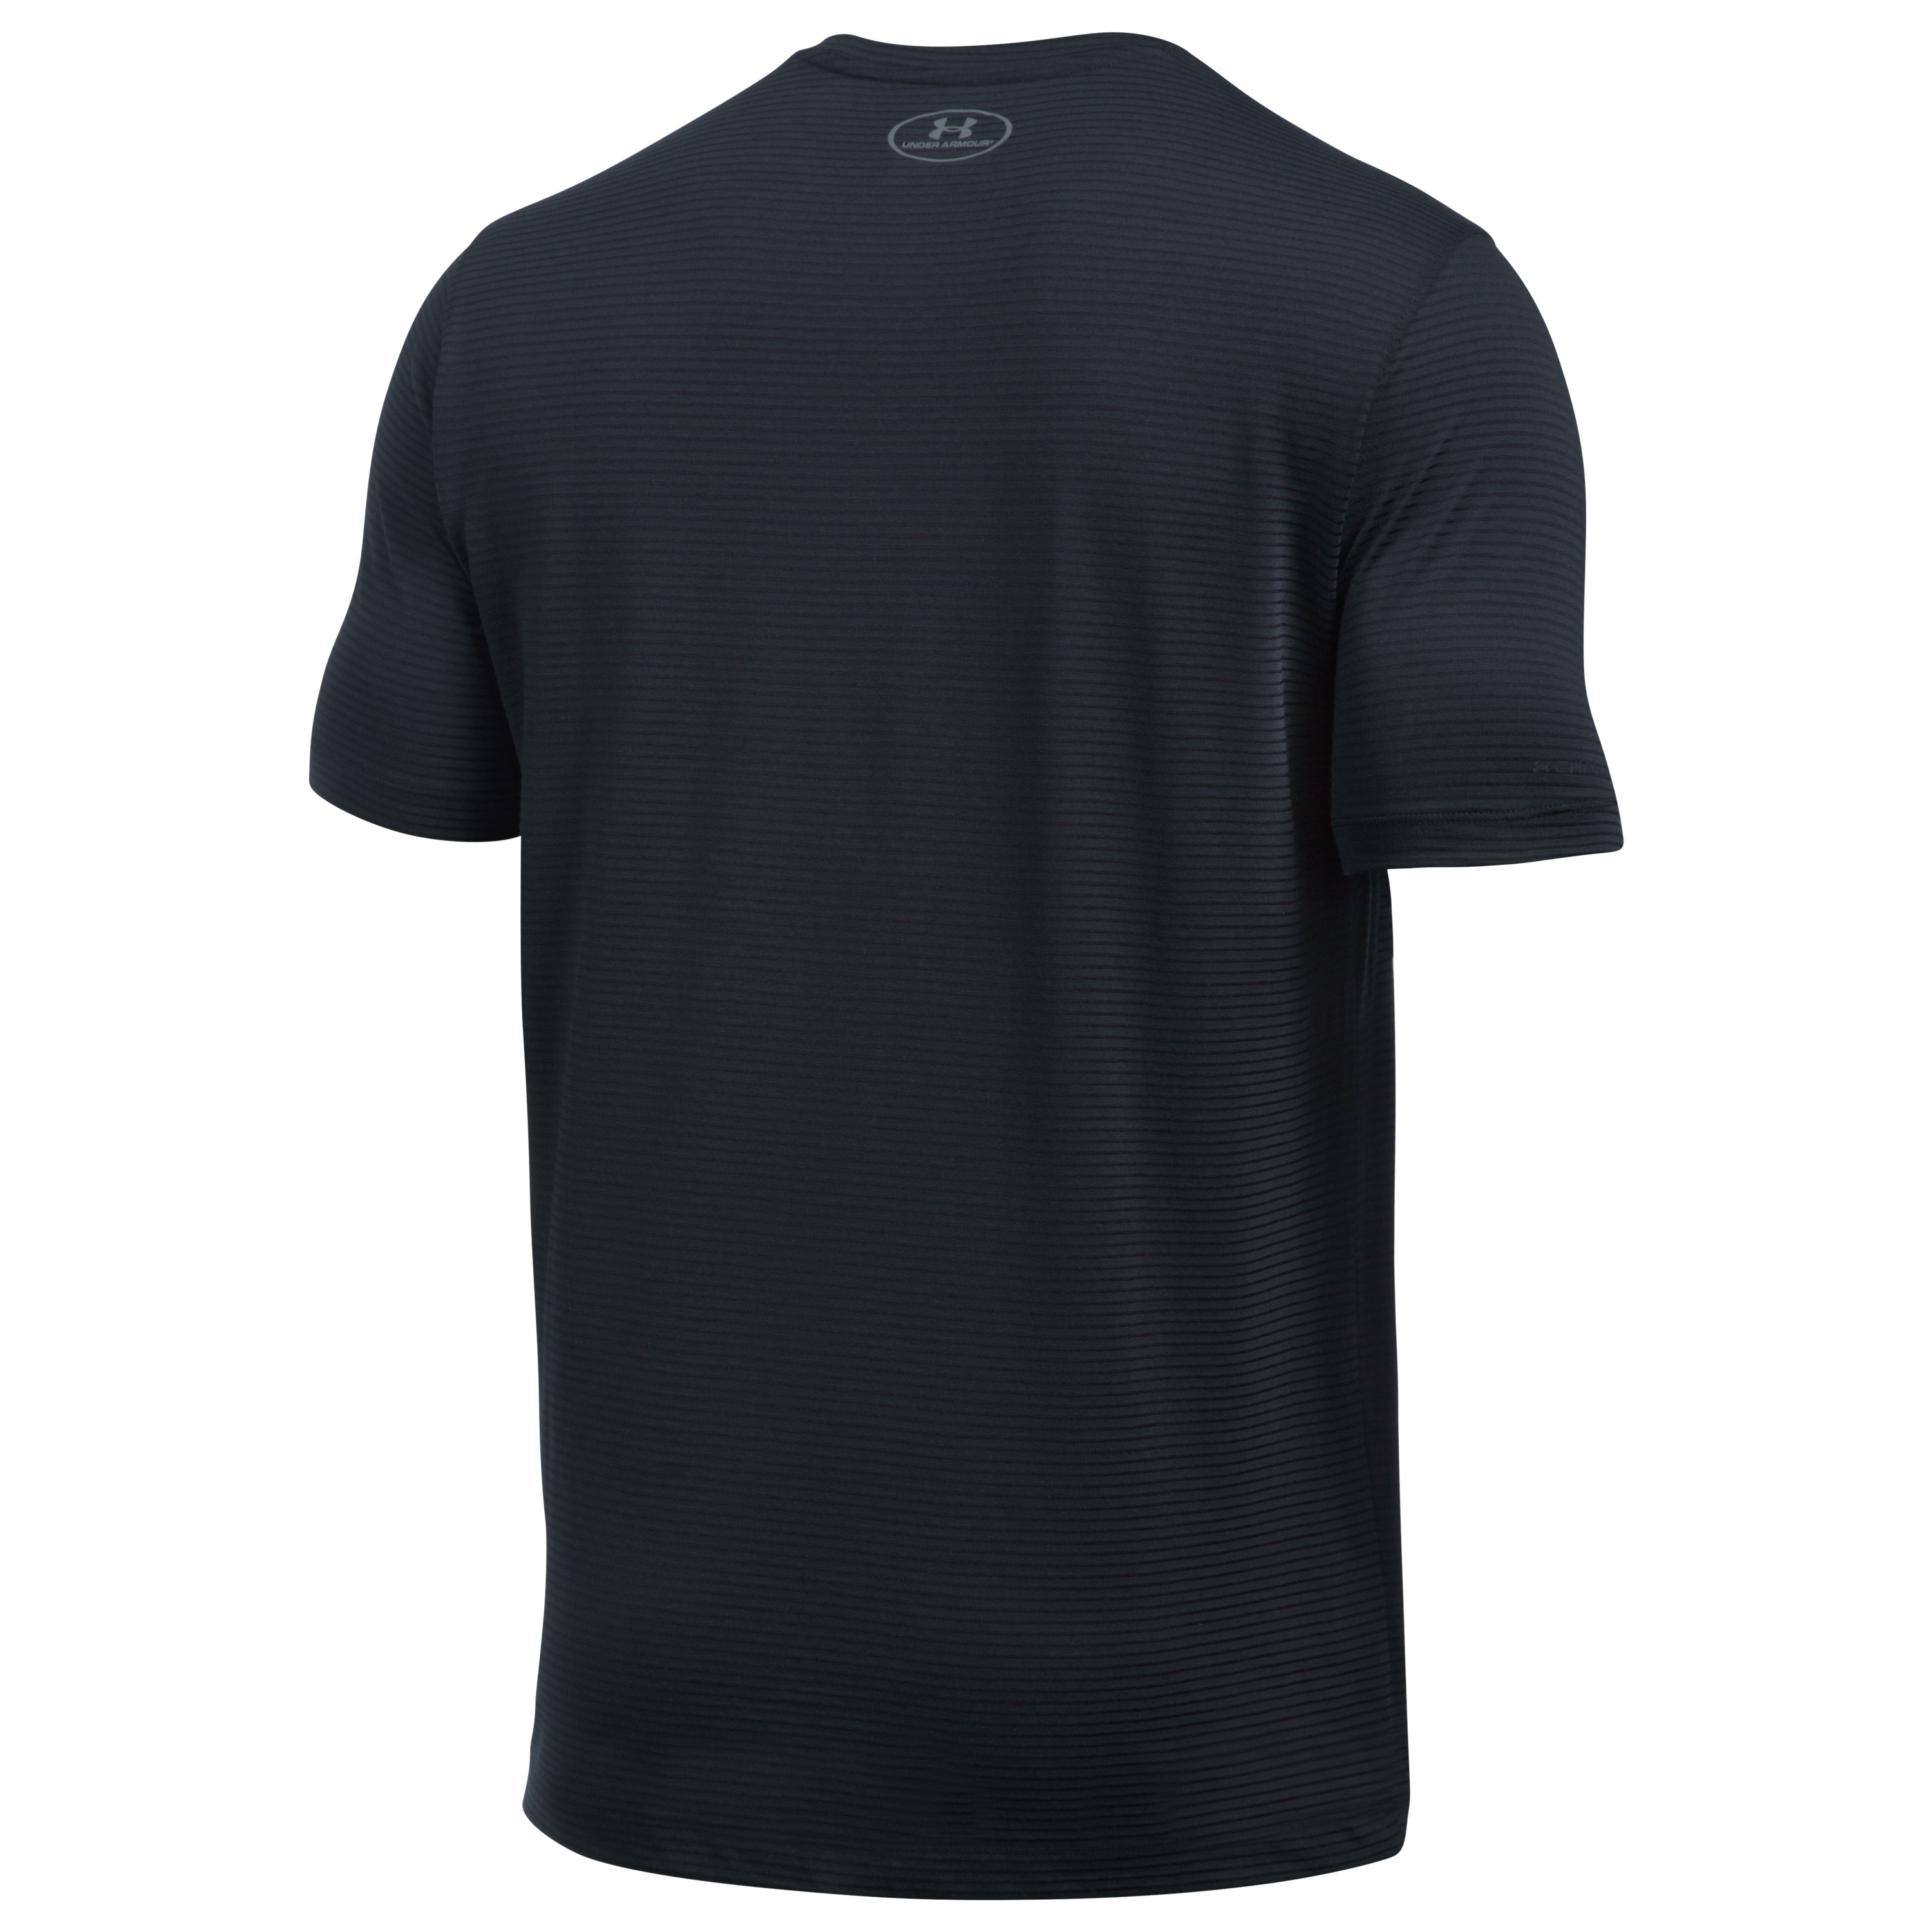 Under Armour Fitness T-Shirt Charged Cotton black graphite